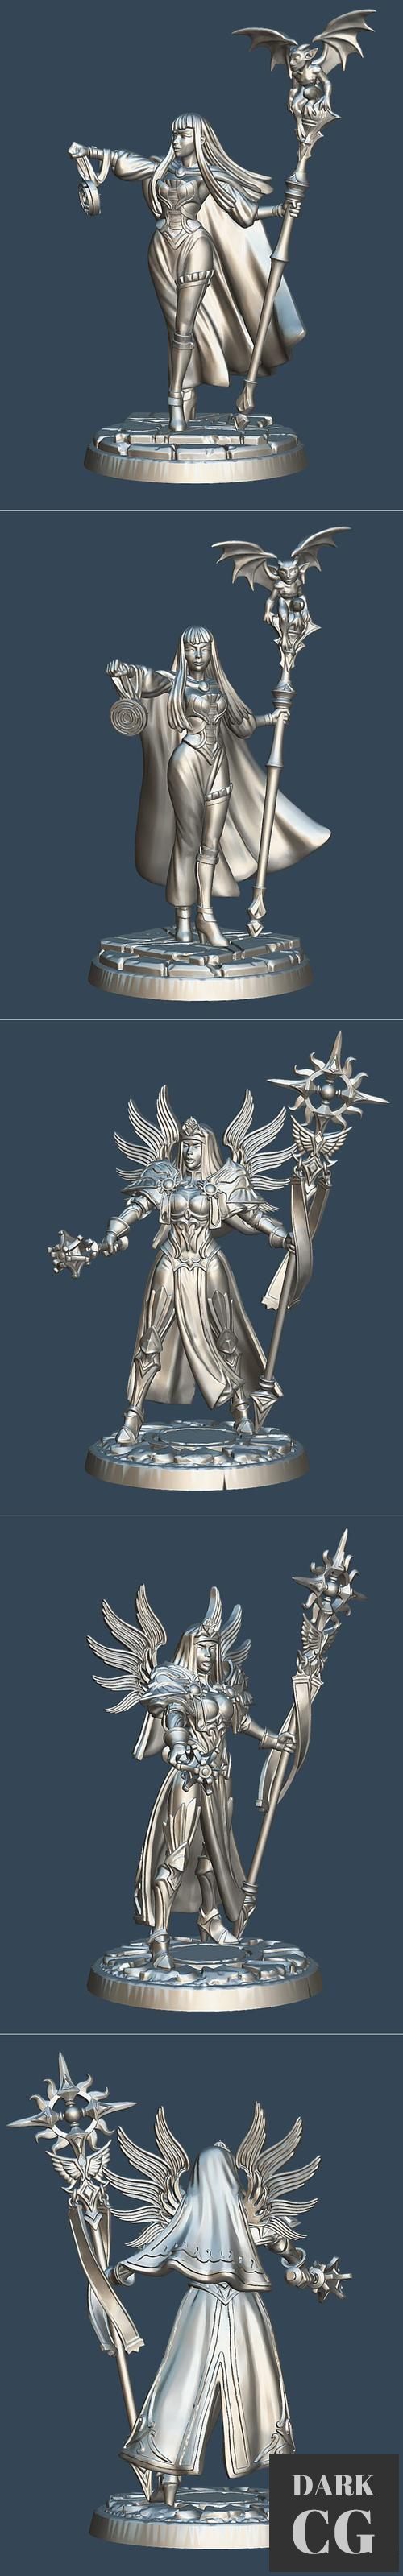 Labyrinth Witch and Abbess in Armor – 3D Print